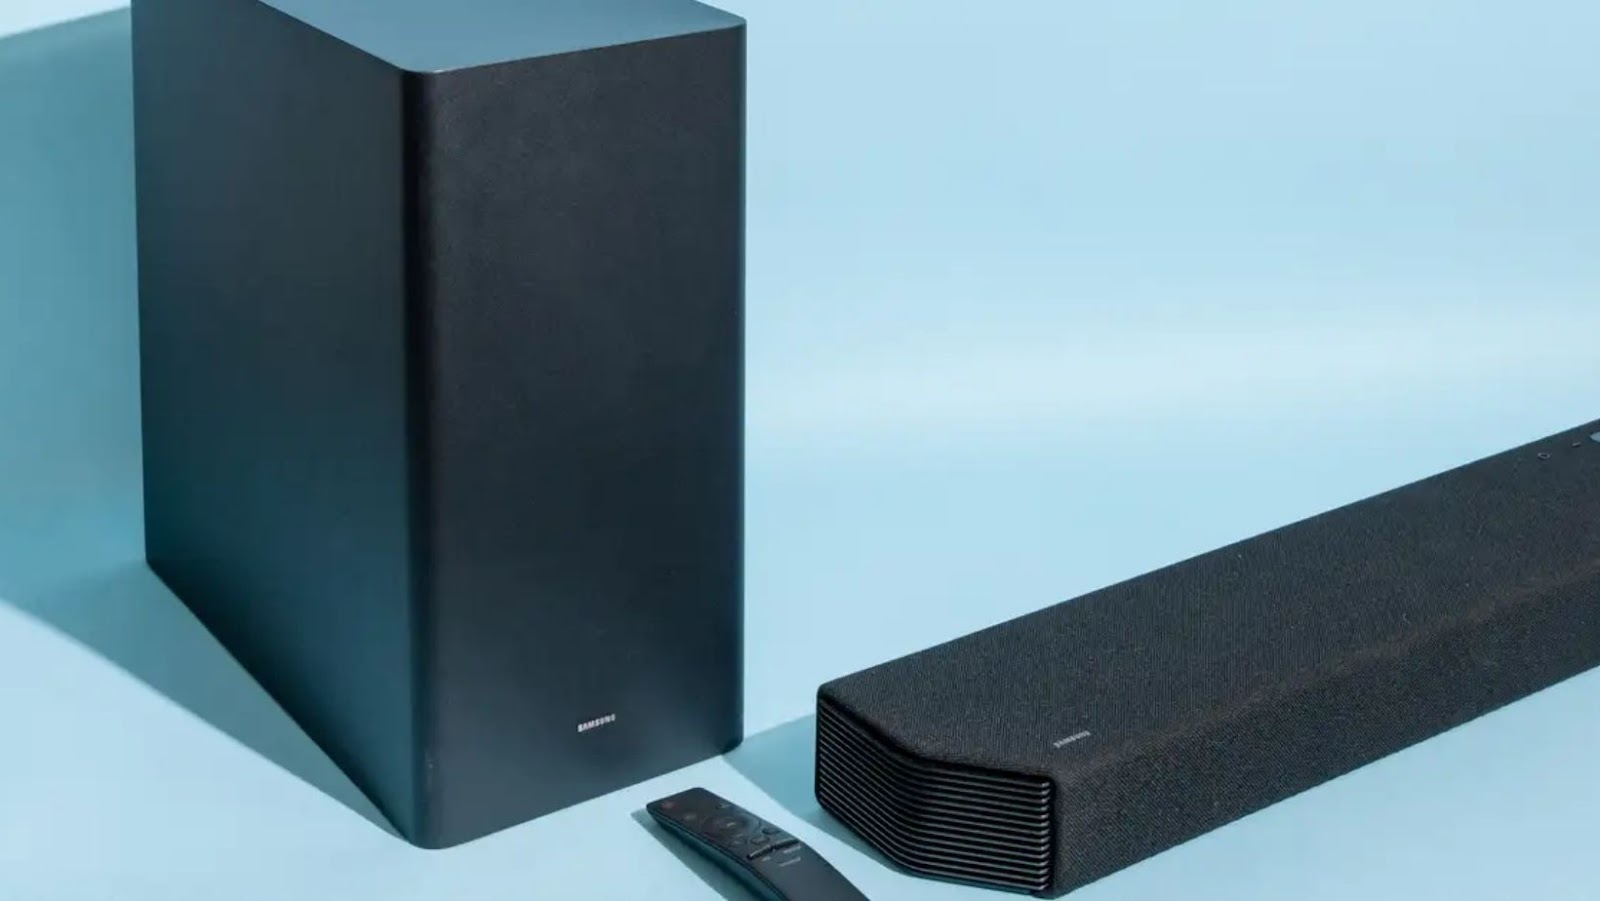 Connecting your Samsung soundbar to your subwoofer